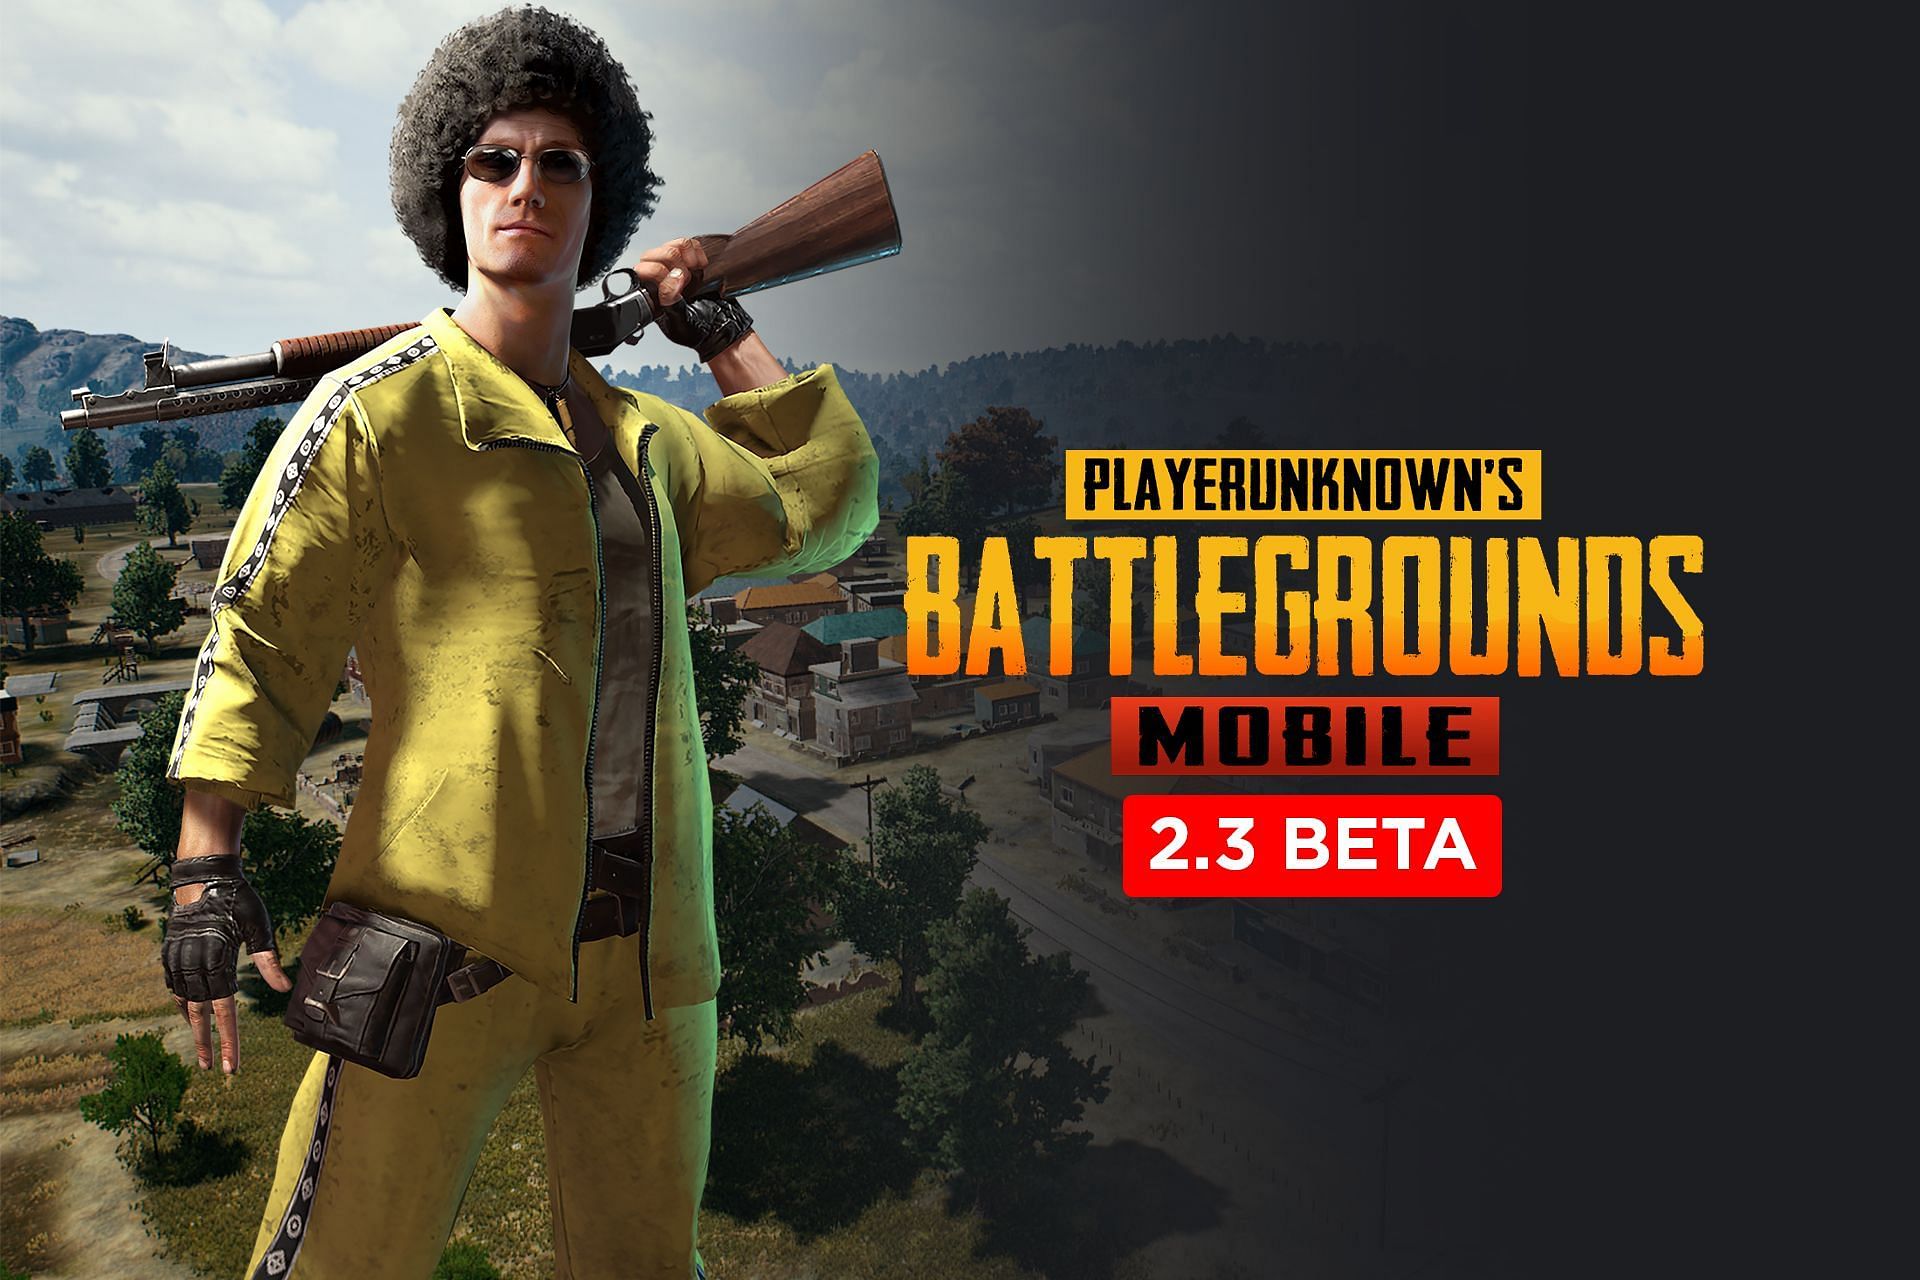 PUBG Mobile 2.3 beta is available for download (Image via Sportskeeda)